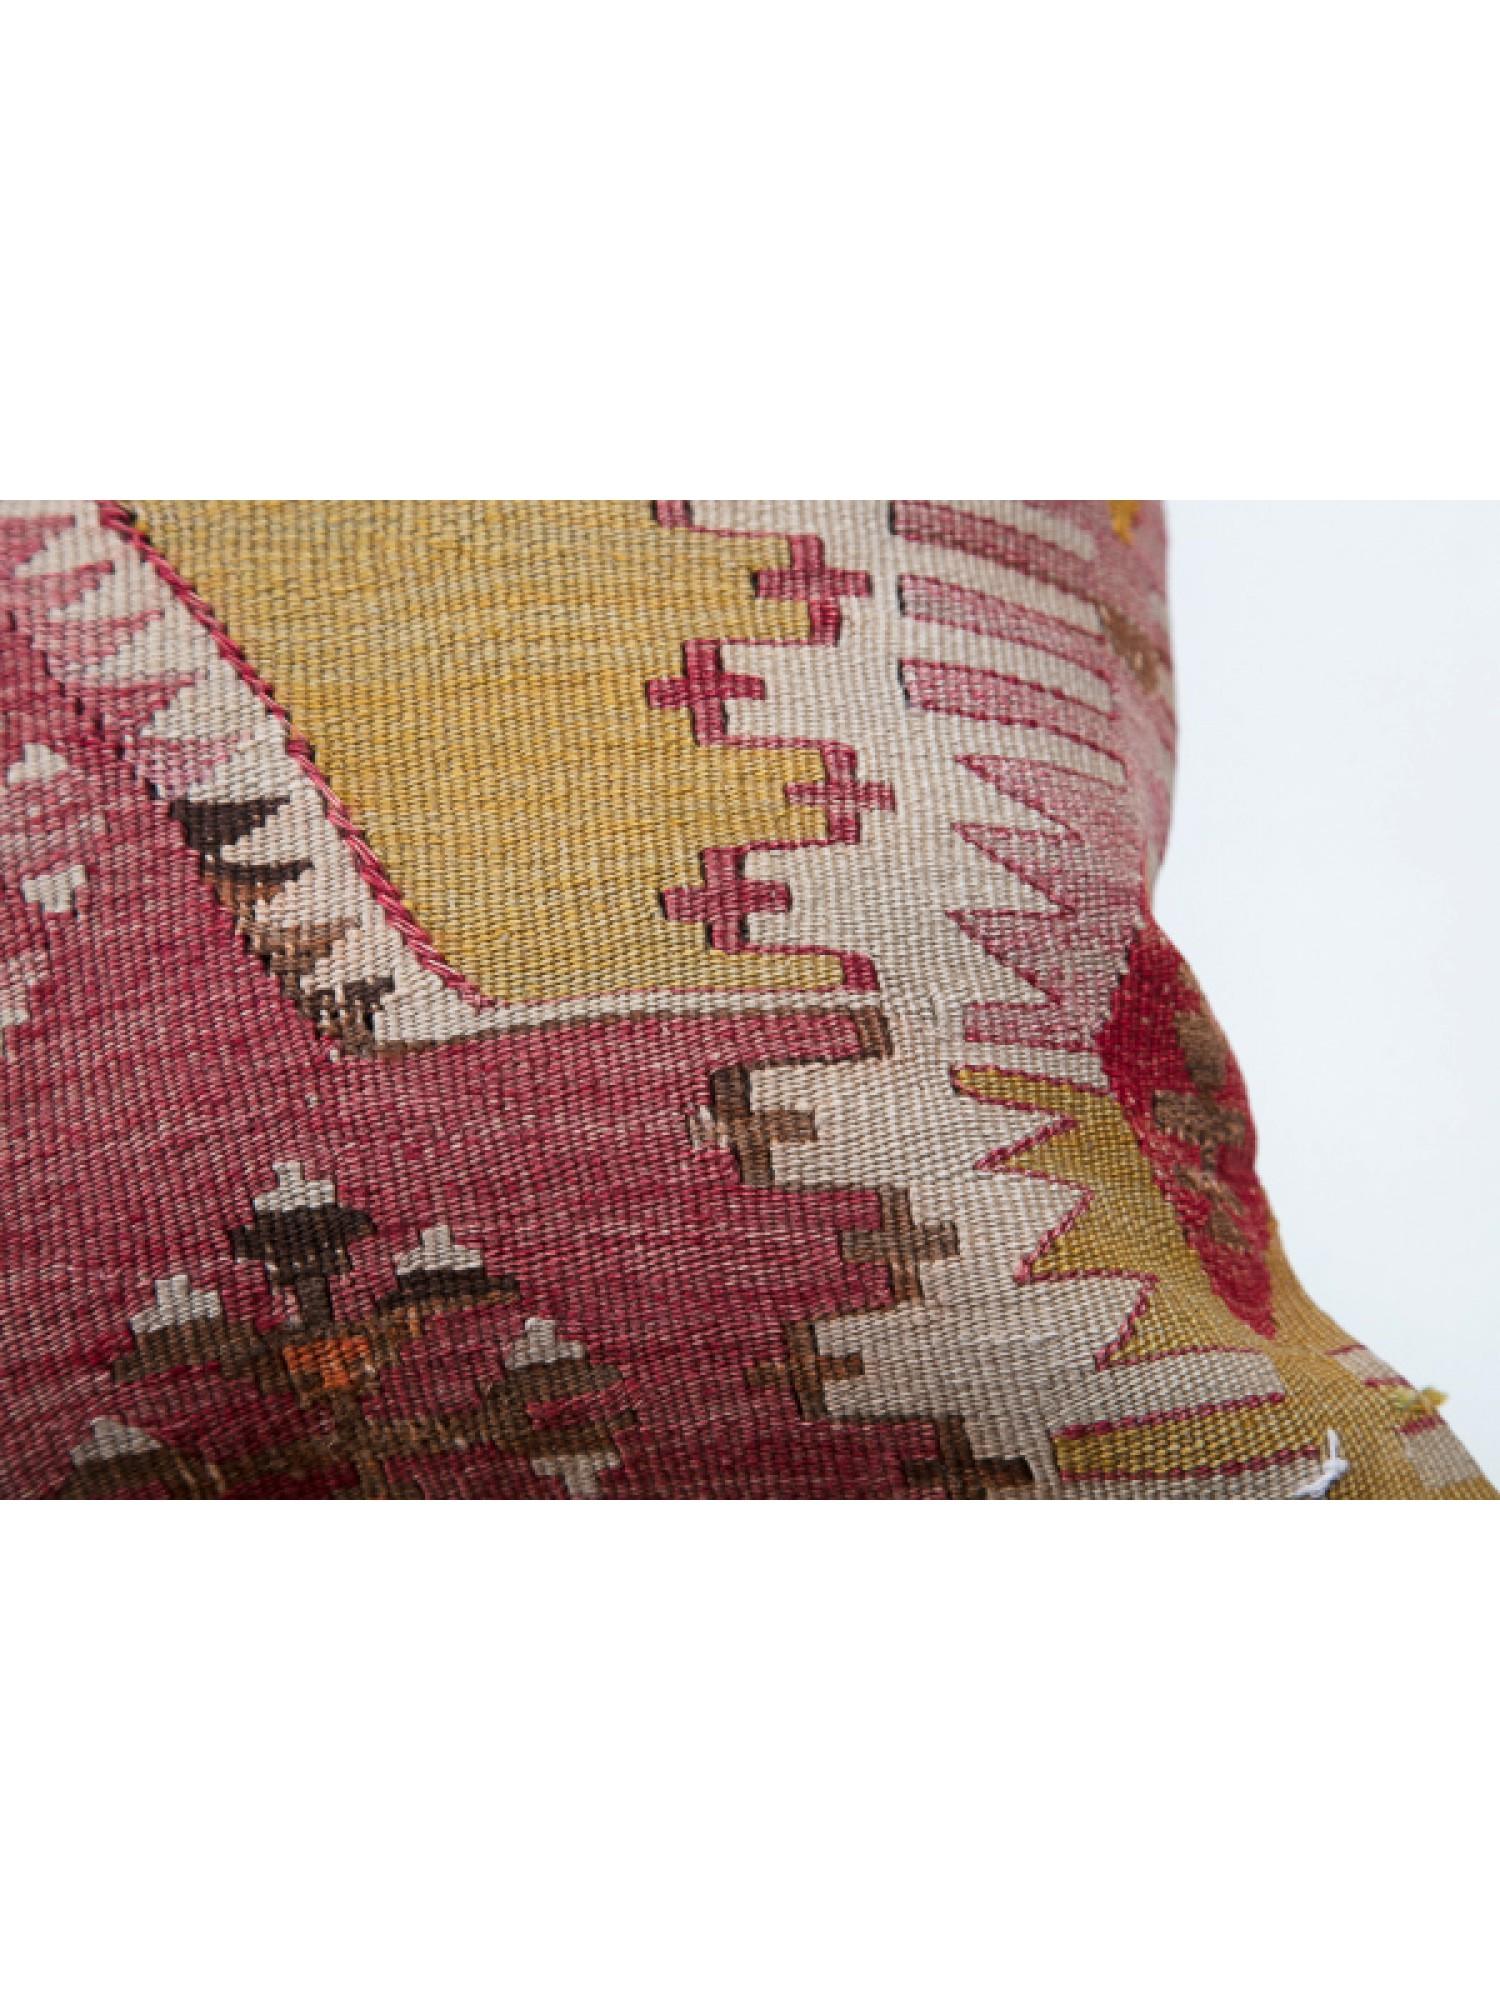 Contemporary Antique & Old Kilim Cushion Cover, Anatolian Yastik Turkish Modern Pillow KC3481 For Sale